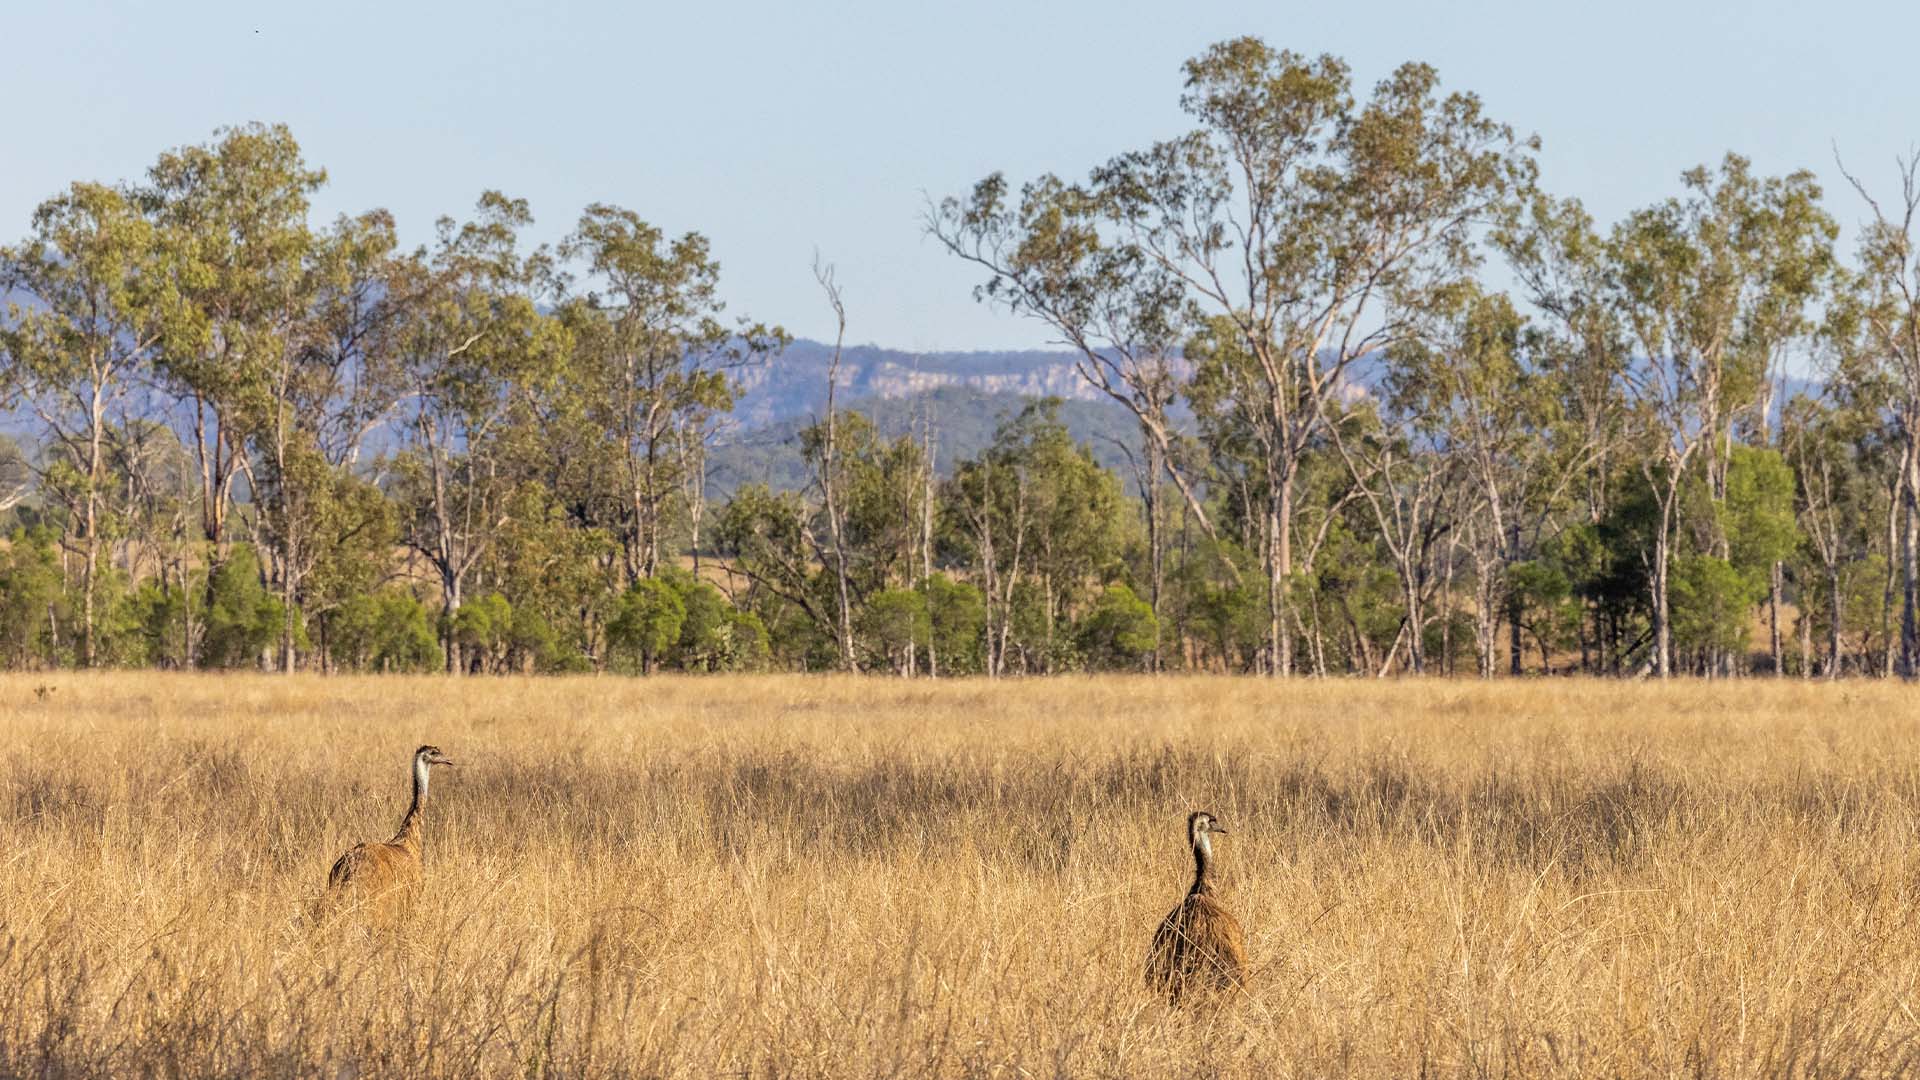 Two emus stood in tall grass